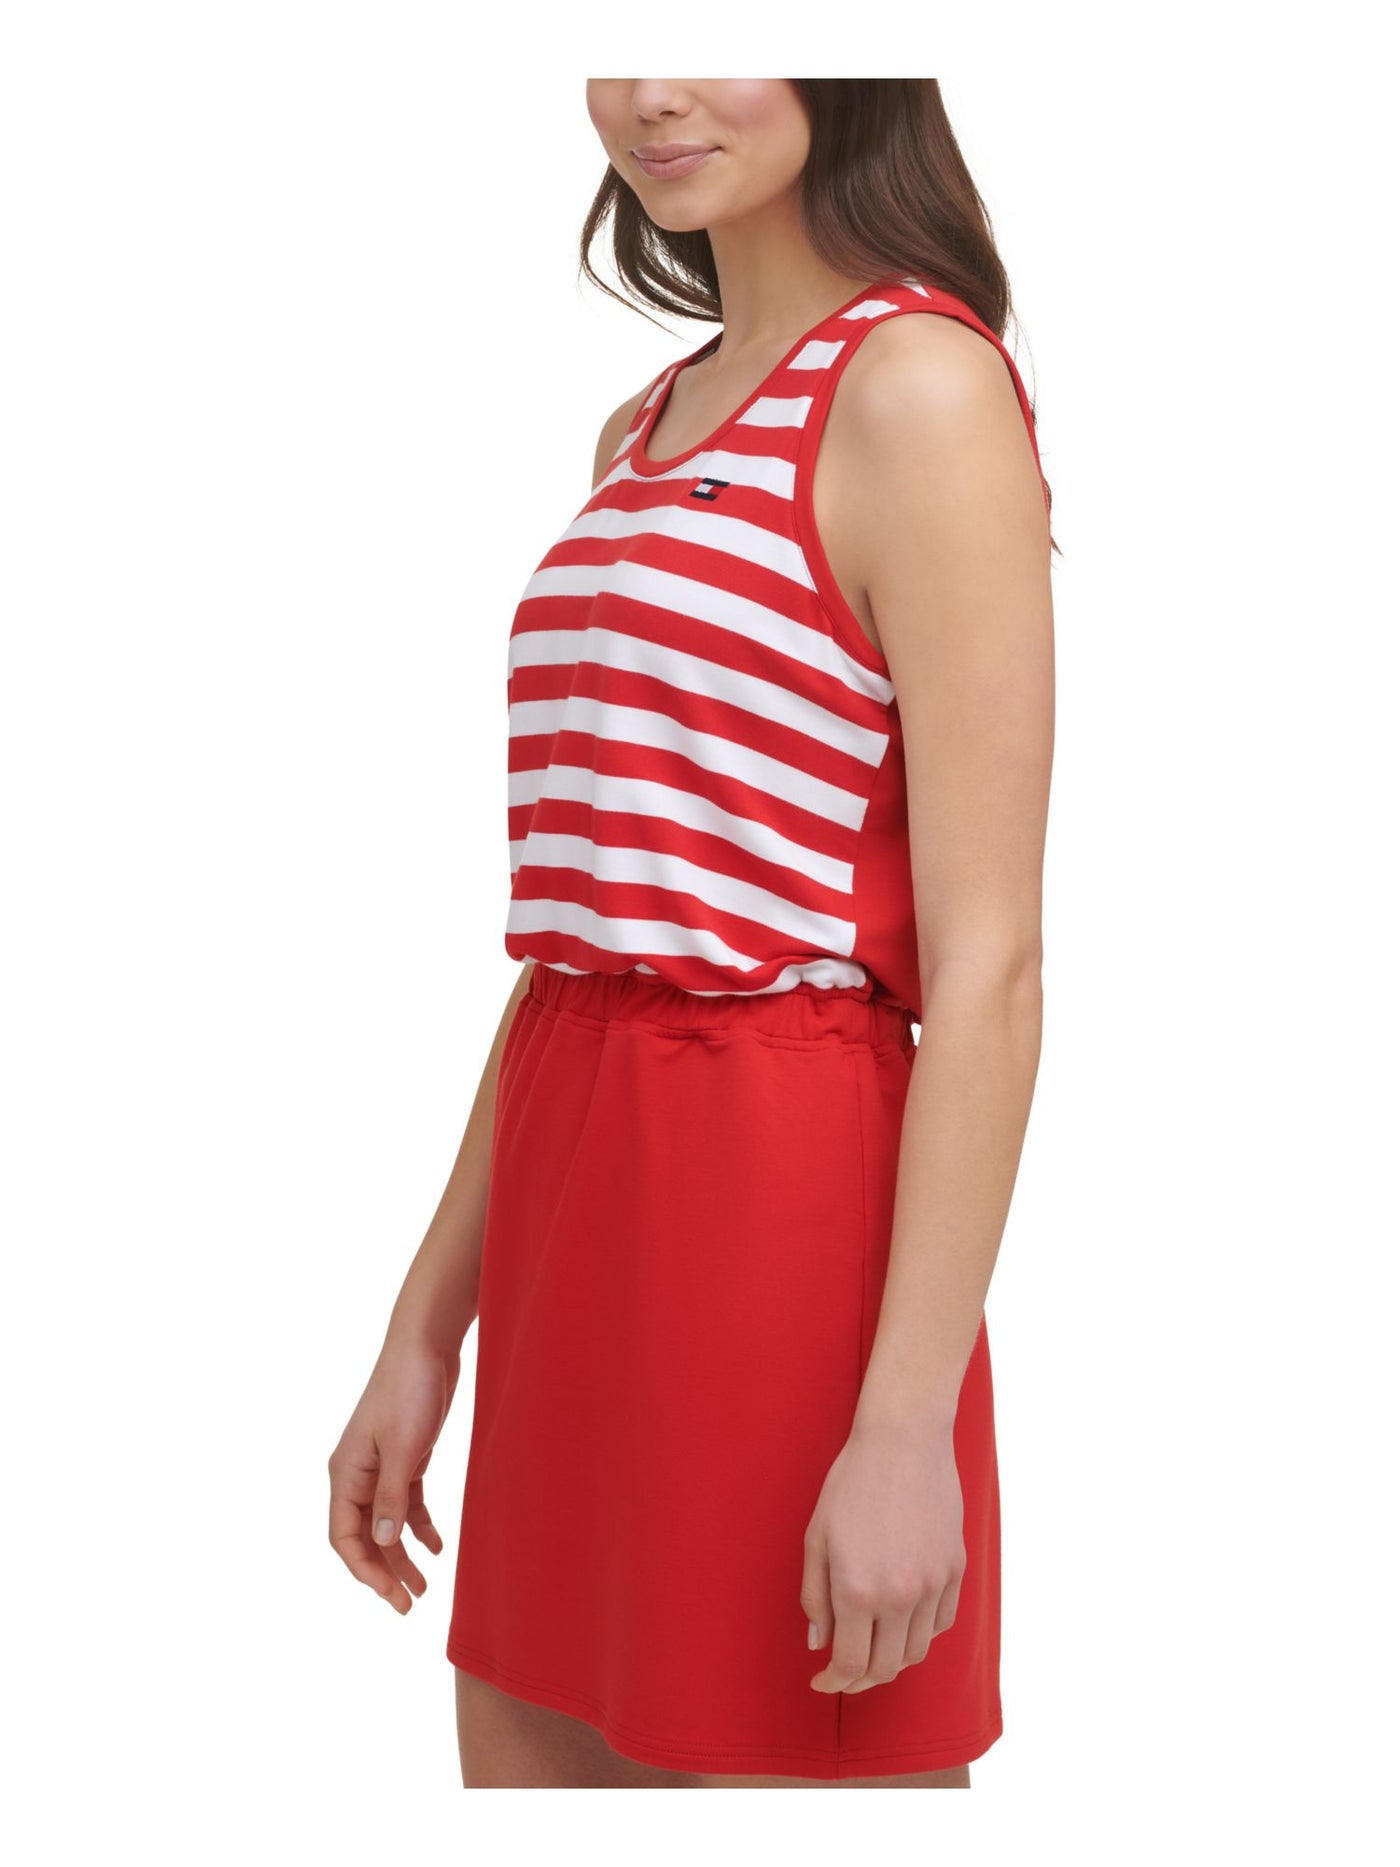 TOMMY HILFIGER SPORT Womens Red Stretch Embroidered Terry Cinched-waist Striped Sleeveless Scoop Neck Short Sheath Dress L